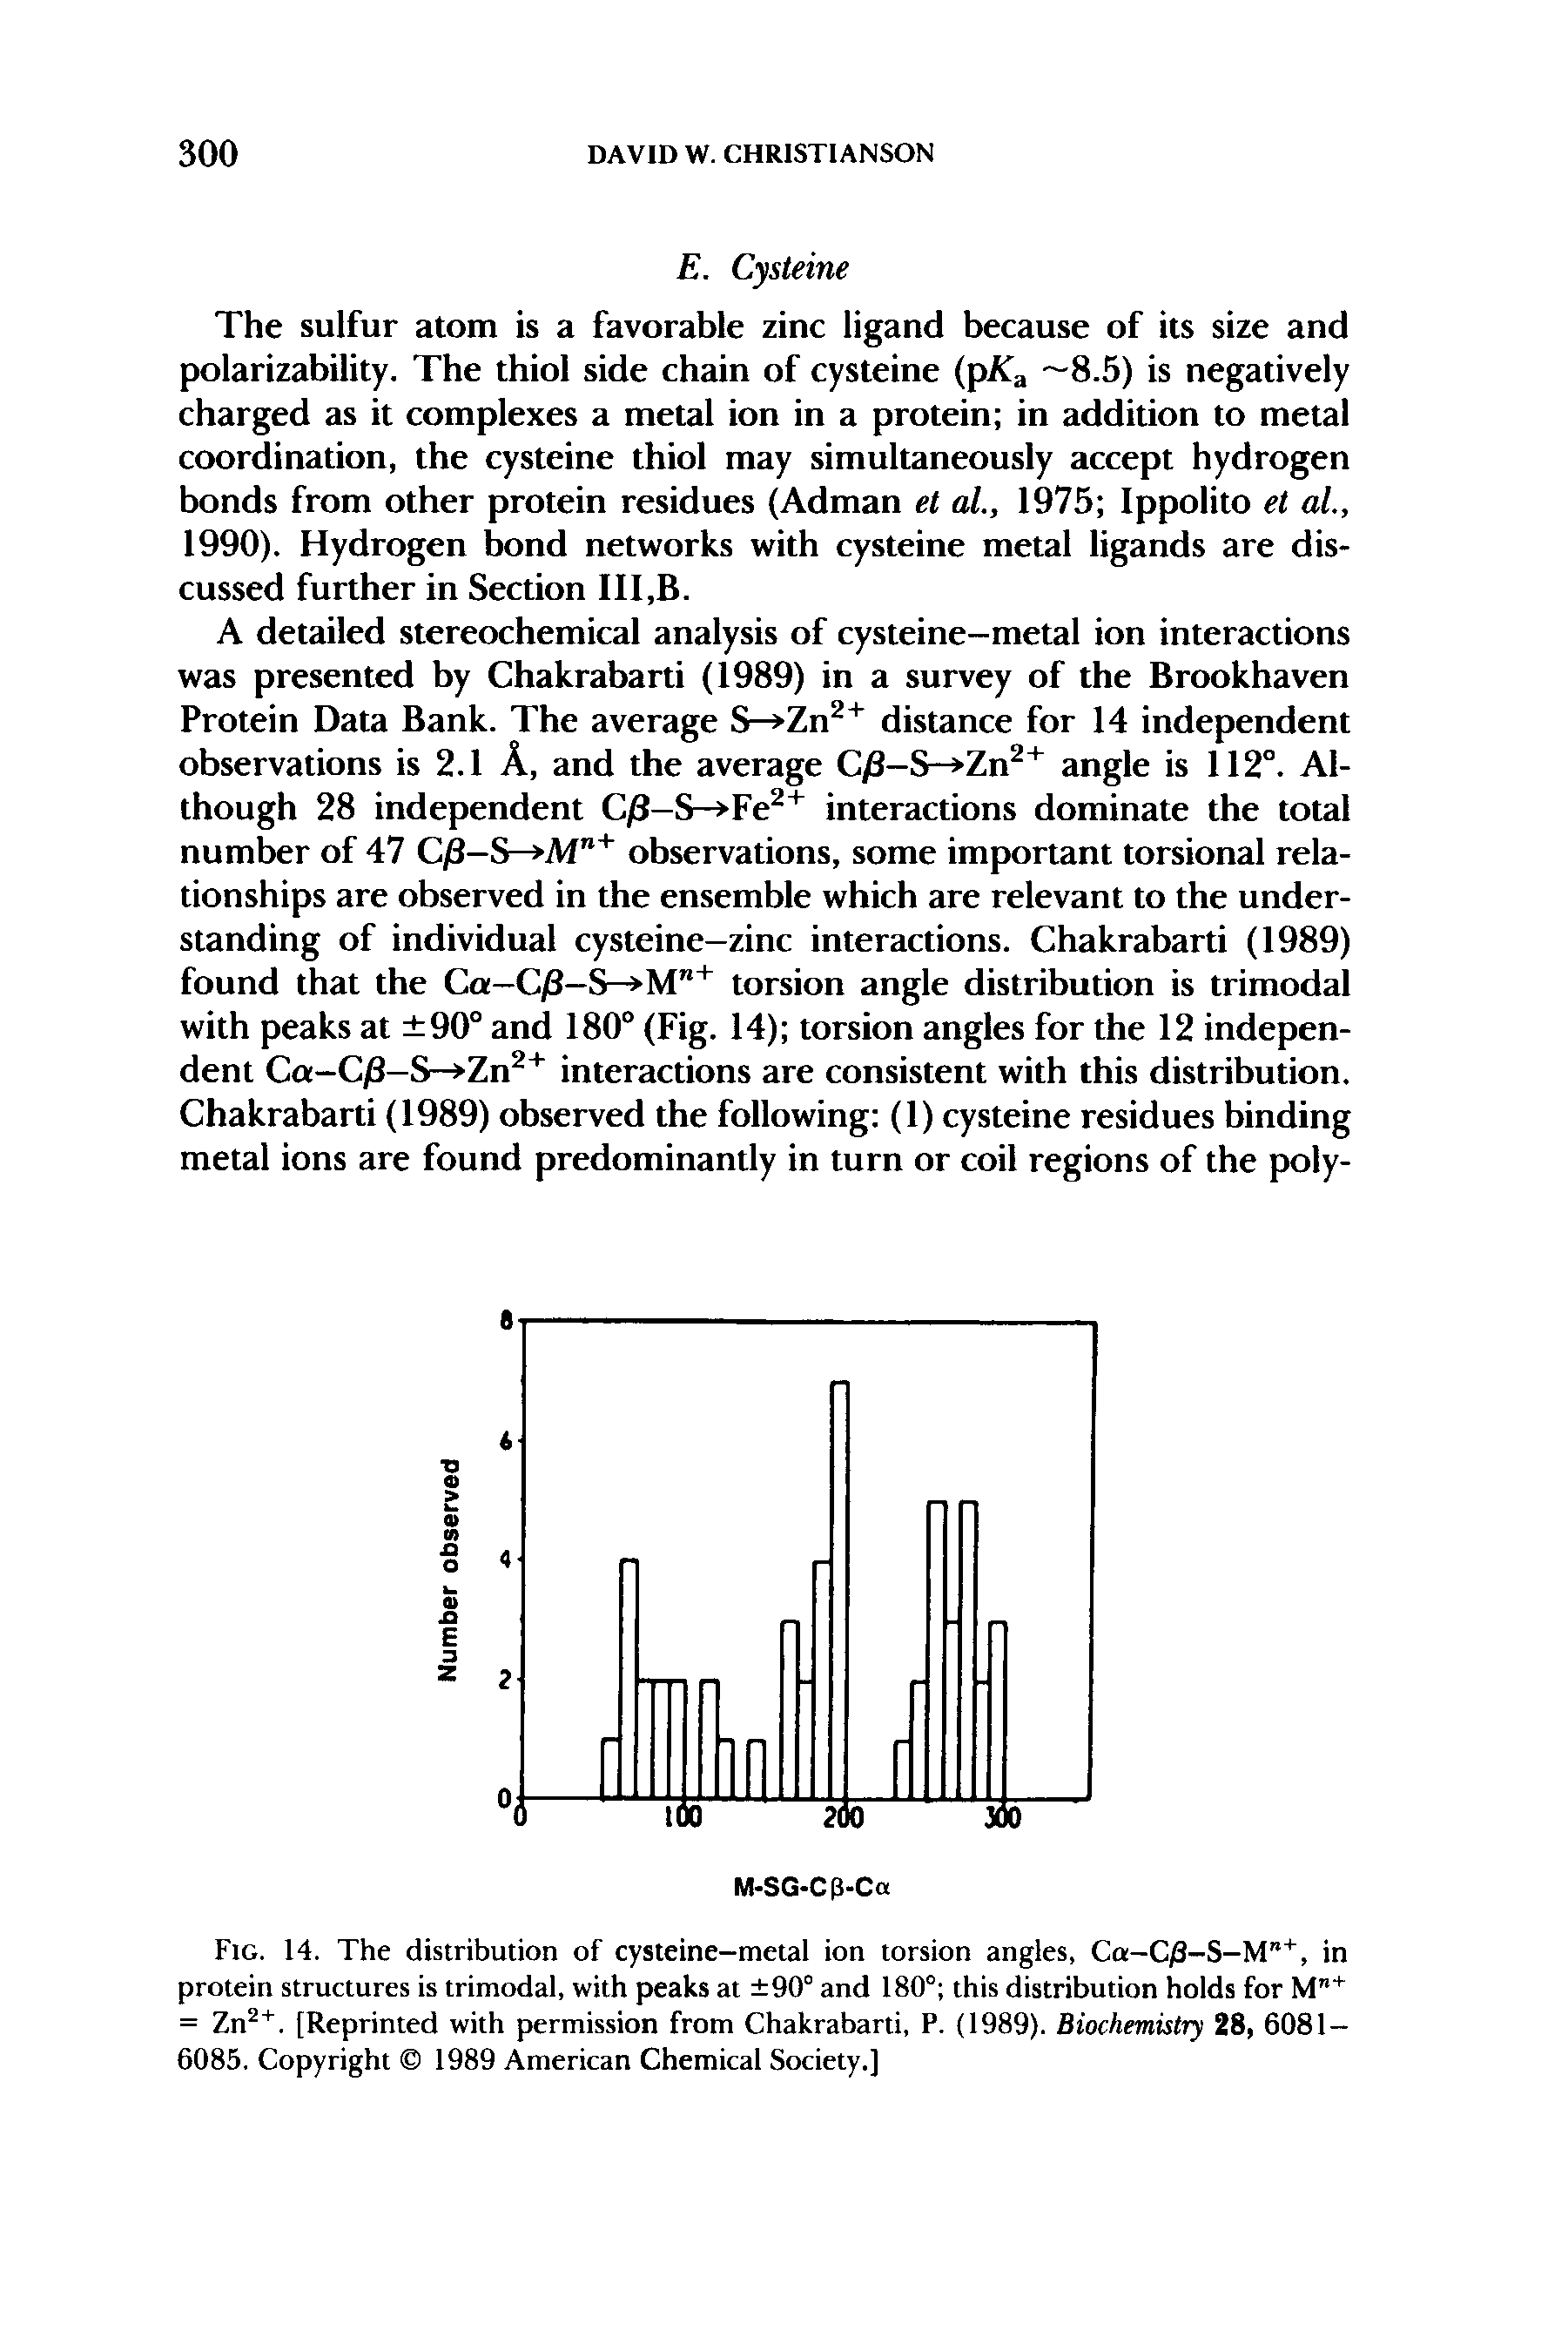 Fig. 14. The distribution of cysteine-metal ion torsion angles, Ca-C/3-S-M , in protein structures is trimodal, with peaks at 90° and 180° this distribution holds for M" = Zn. [Reprinted with permission from Chakrabarti, P. (1989). Biochemistry 28, 6081-6085. Copyright 1989 American Chemical Society.]...